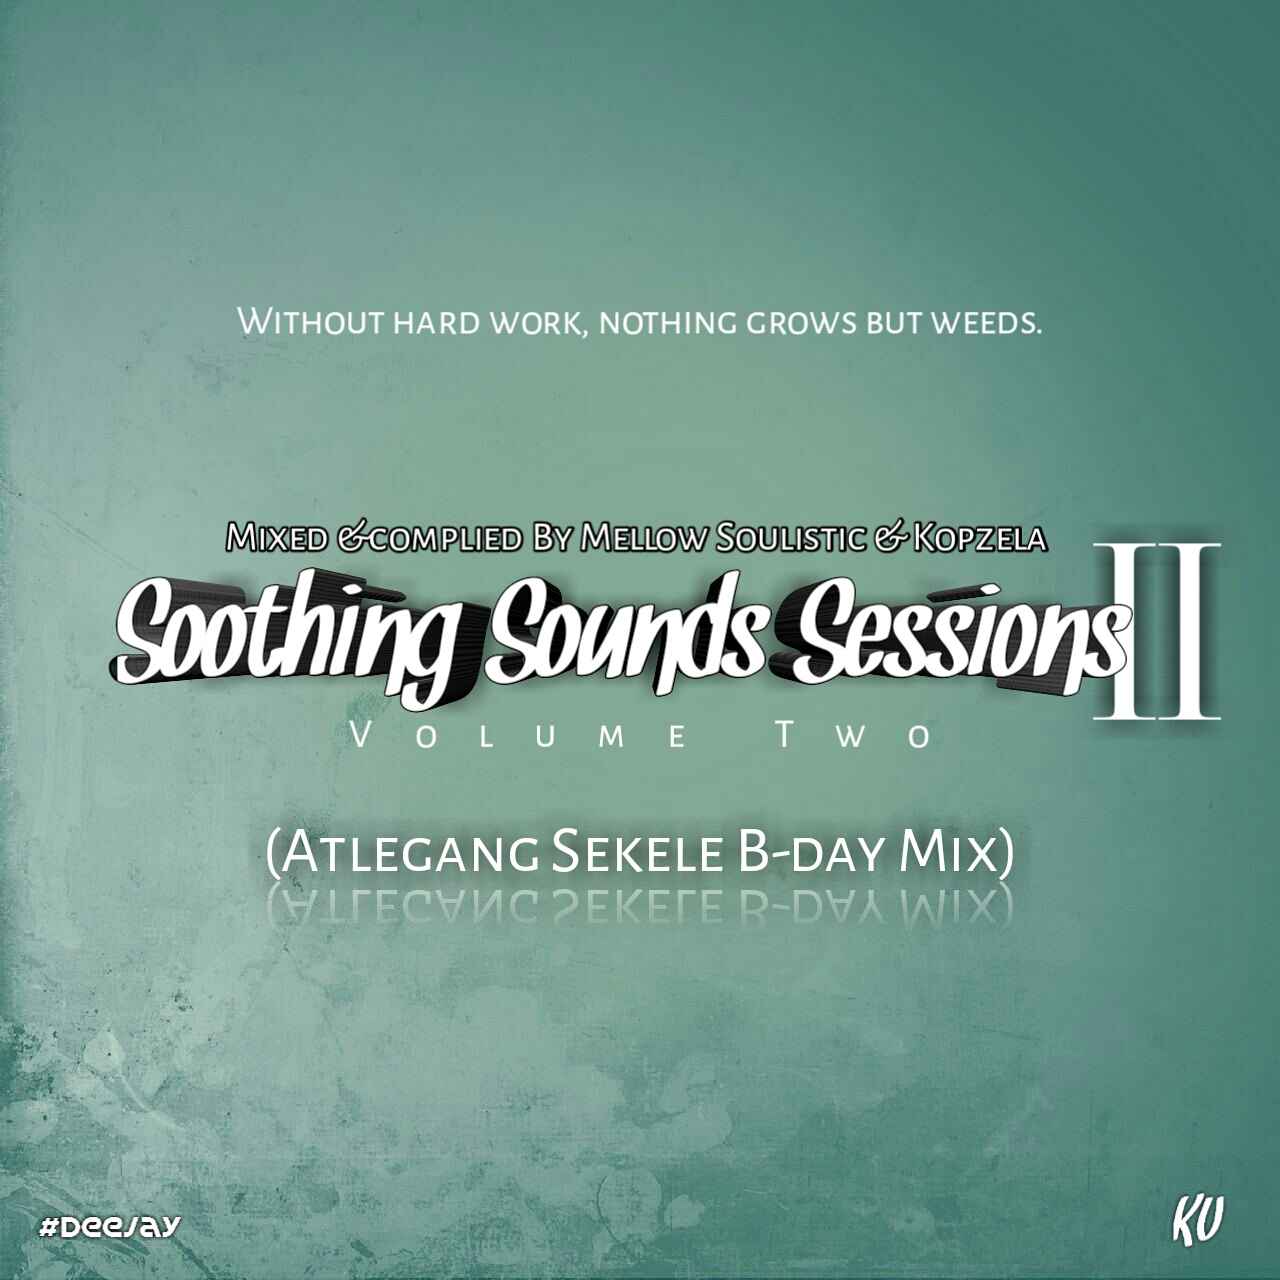 Mellow Soulistic & Kopzela - Soothing Sounds Sessions vol. 2 (Atlegang Sekele B-day Mix)